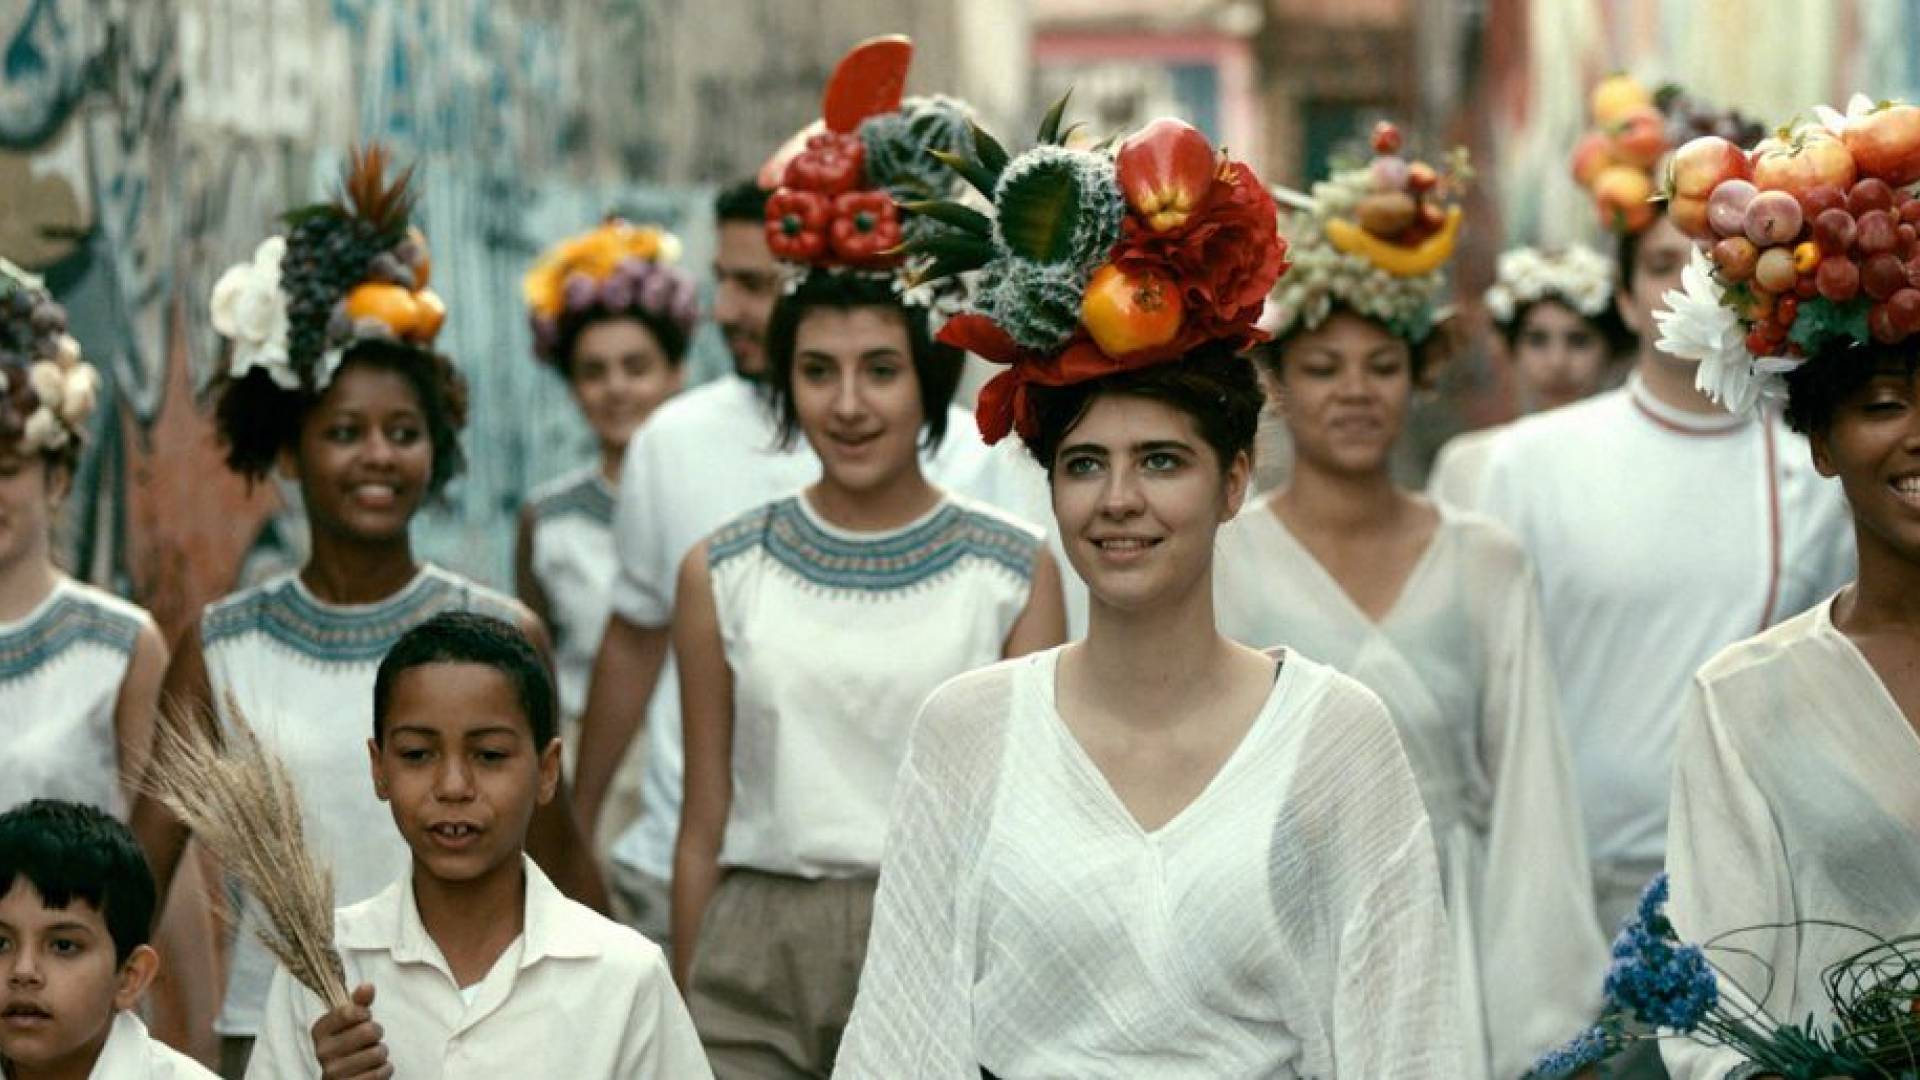 group of people with fruit on their heads walk toward camera